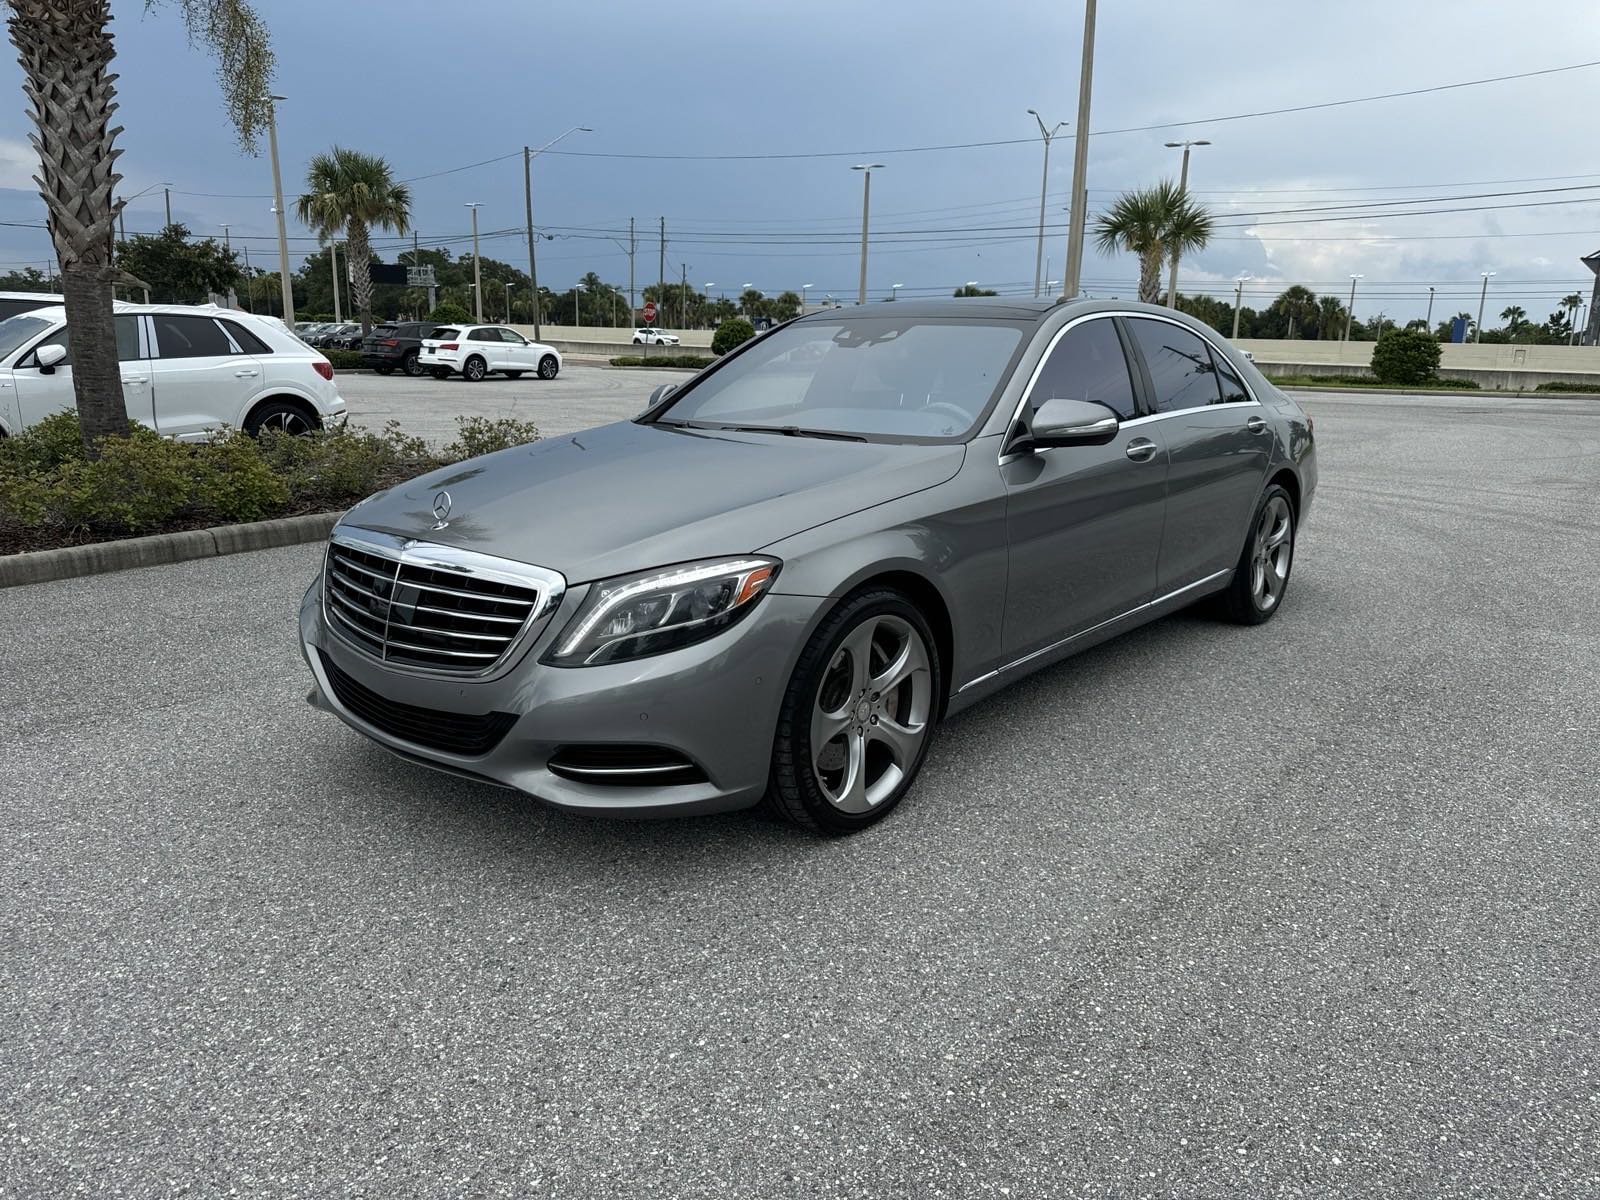 Used 2014 Mercedes-Benz S-Class S550 with VIN WDDUG8FB9EA049533 for sale in Clearwater, FL